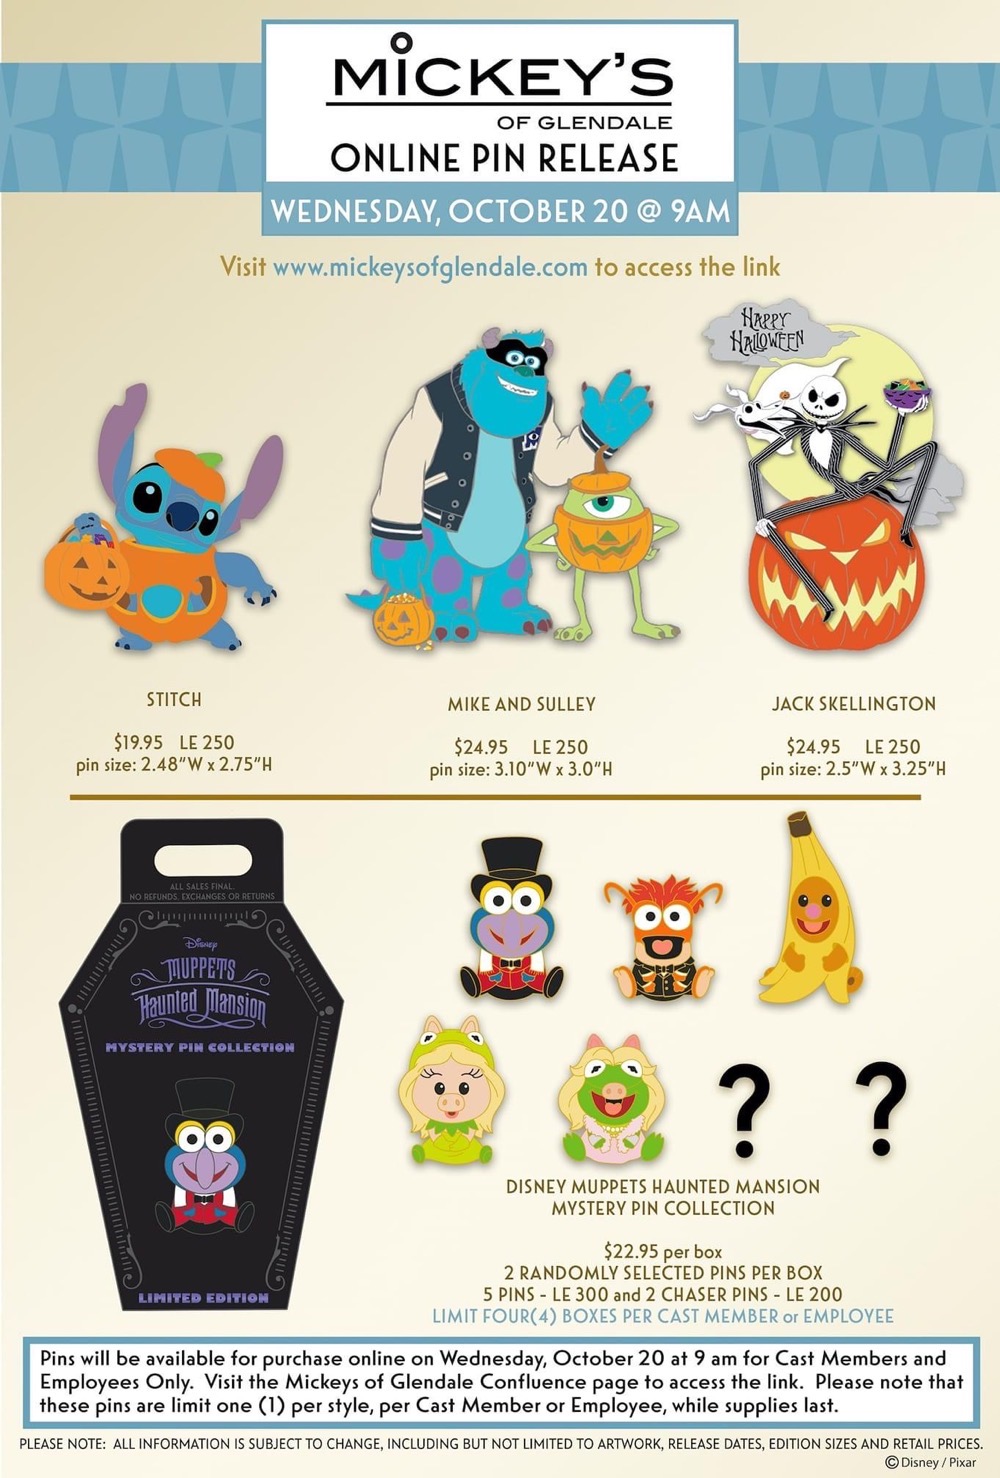 Halloween-2021-Muppets-Haunted-Mansion-WDI-Pin-Releases.jpg